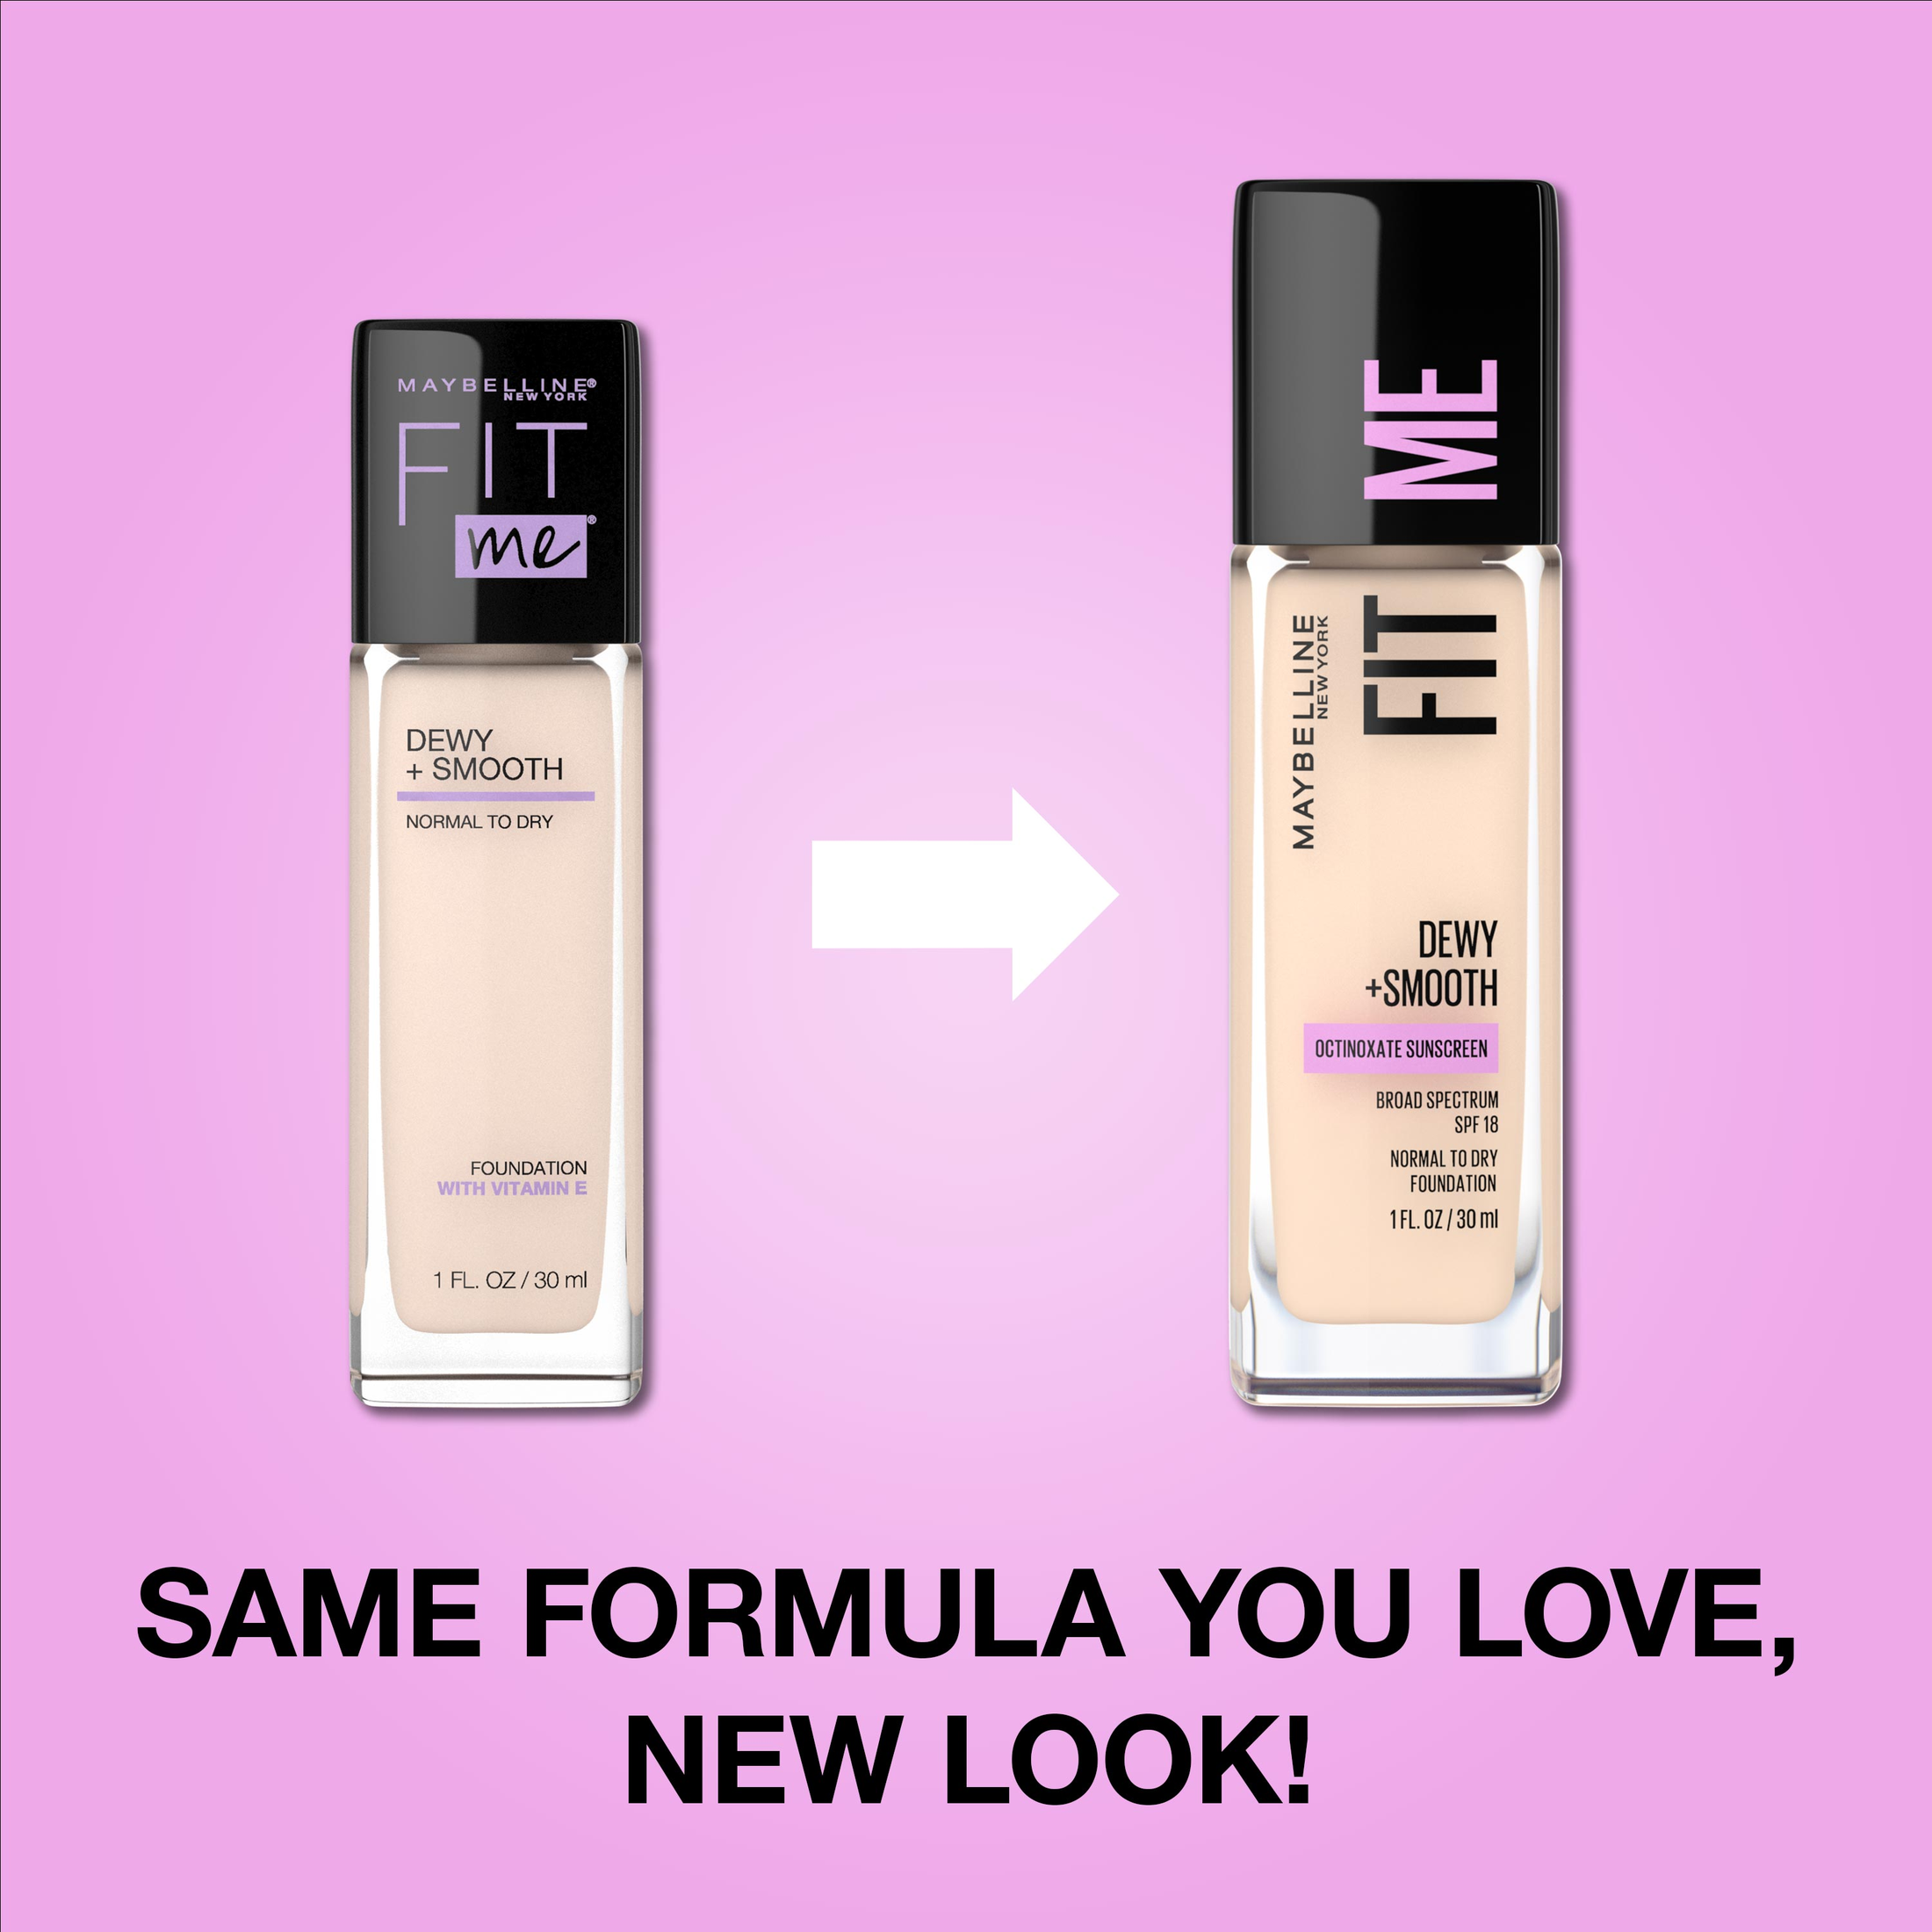 Maybelline Fit Me Dewy and Smooth Liquid Foundation Makeup, 110 Porcelain, 1 fl oz - image 3 of 9